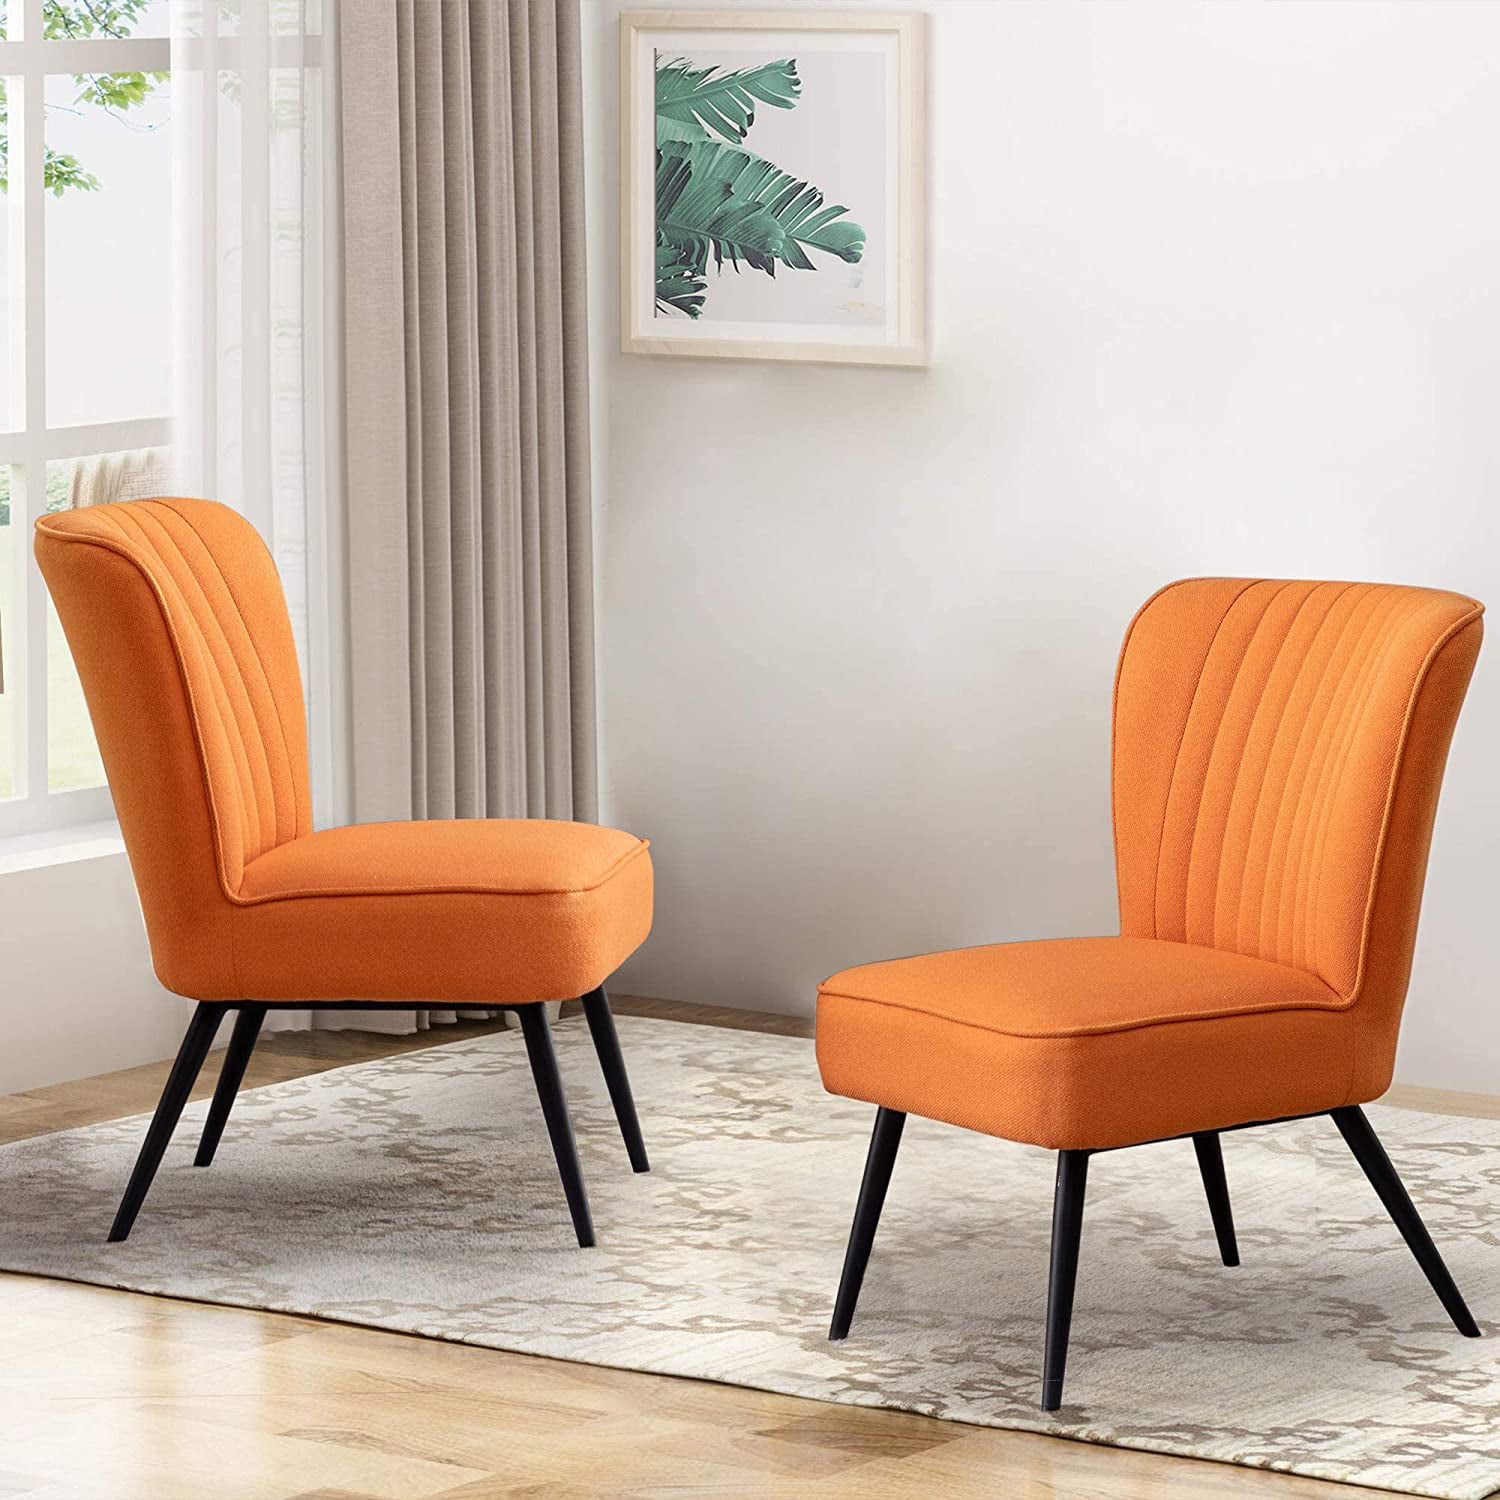 for Accent Couch of Chair Andeworld Club Living Slipper Wingback Reception Room Bedroom-Orange Comfy 2 Upholstered Sofa Guest Chairs Single Modern Armless Set